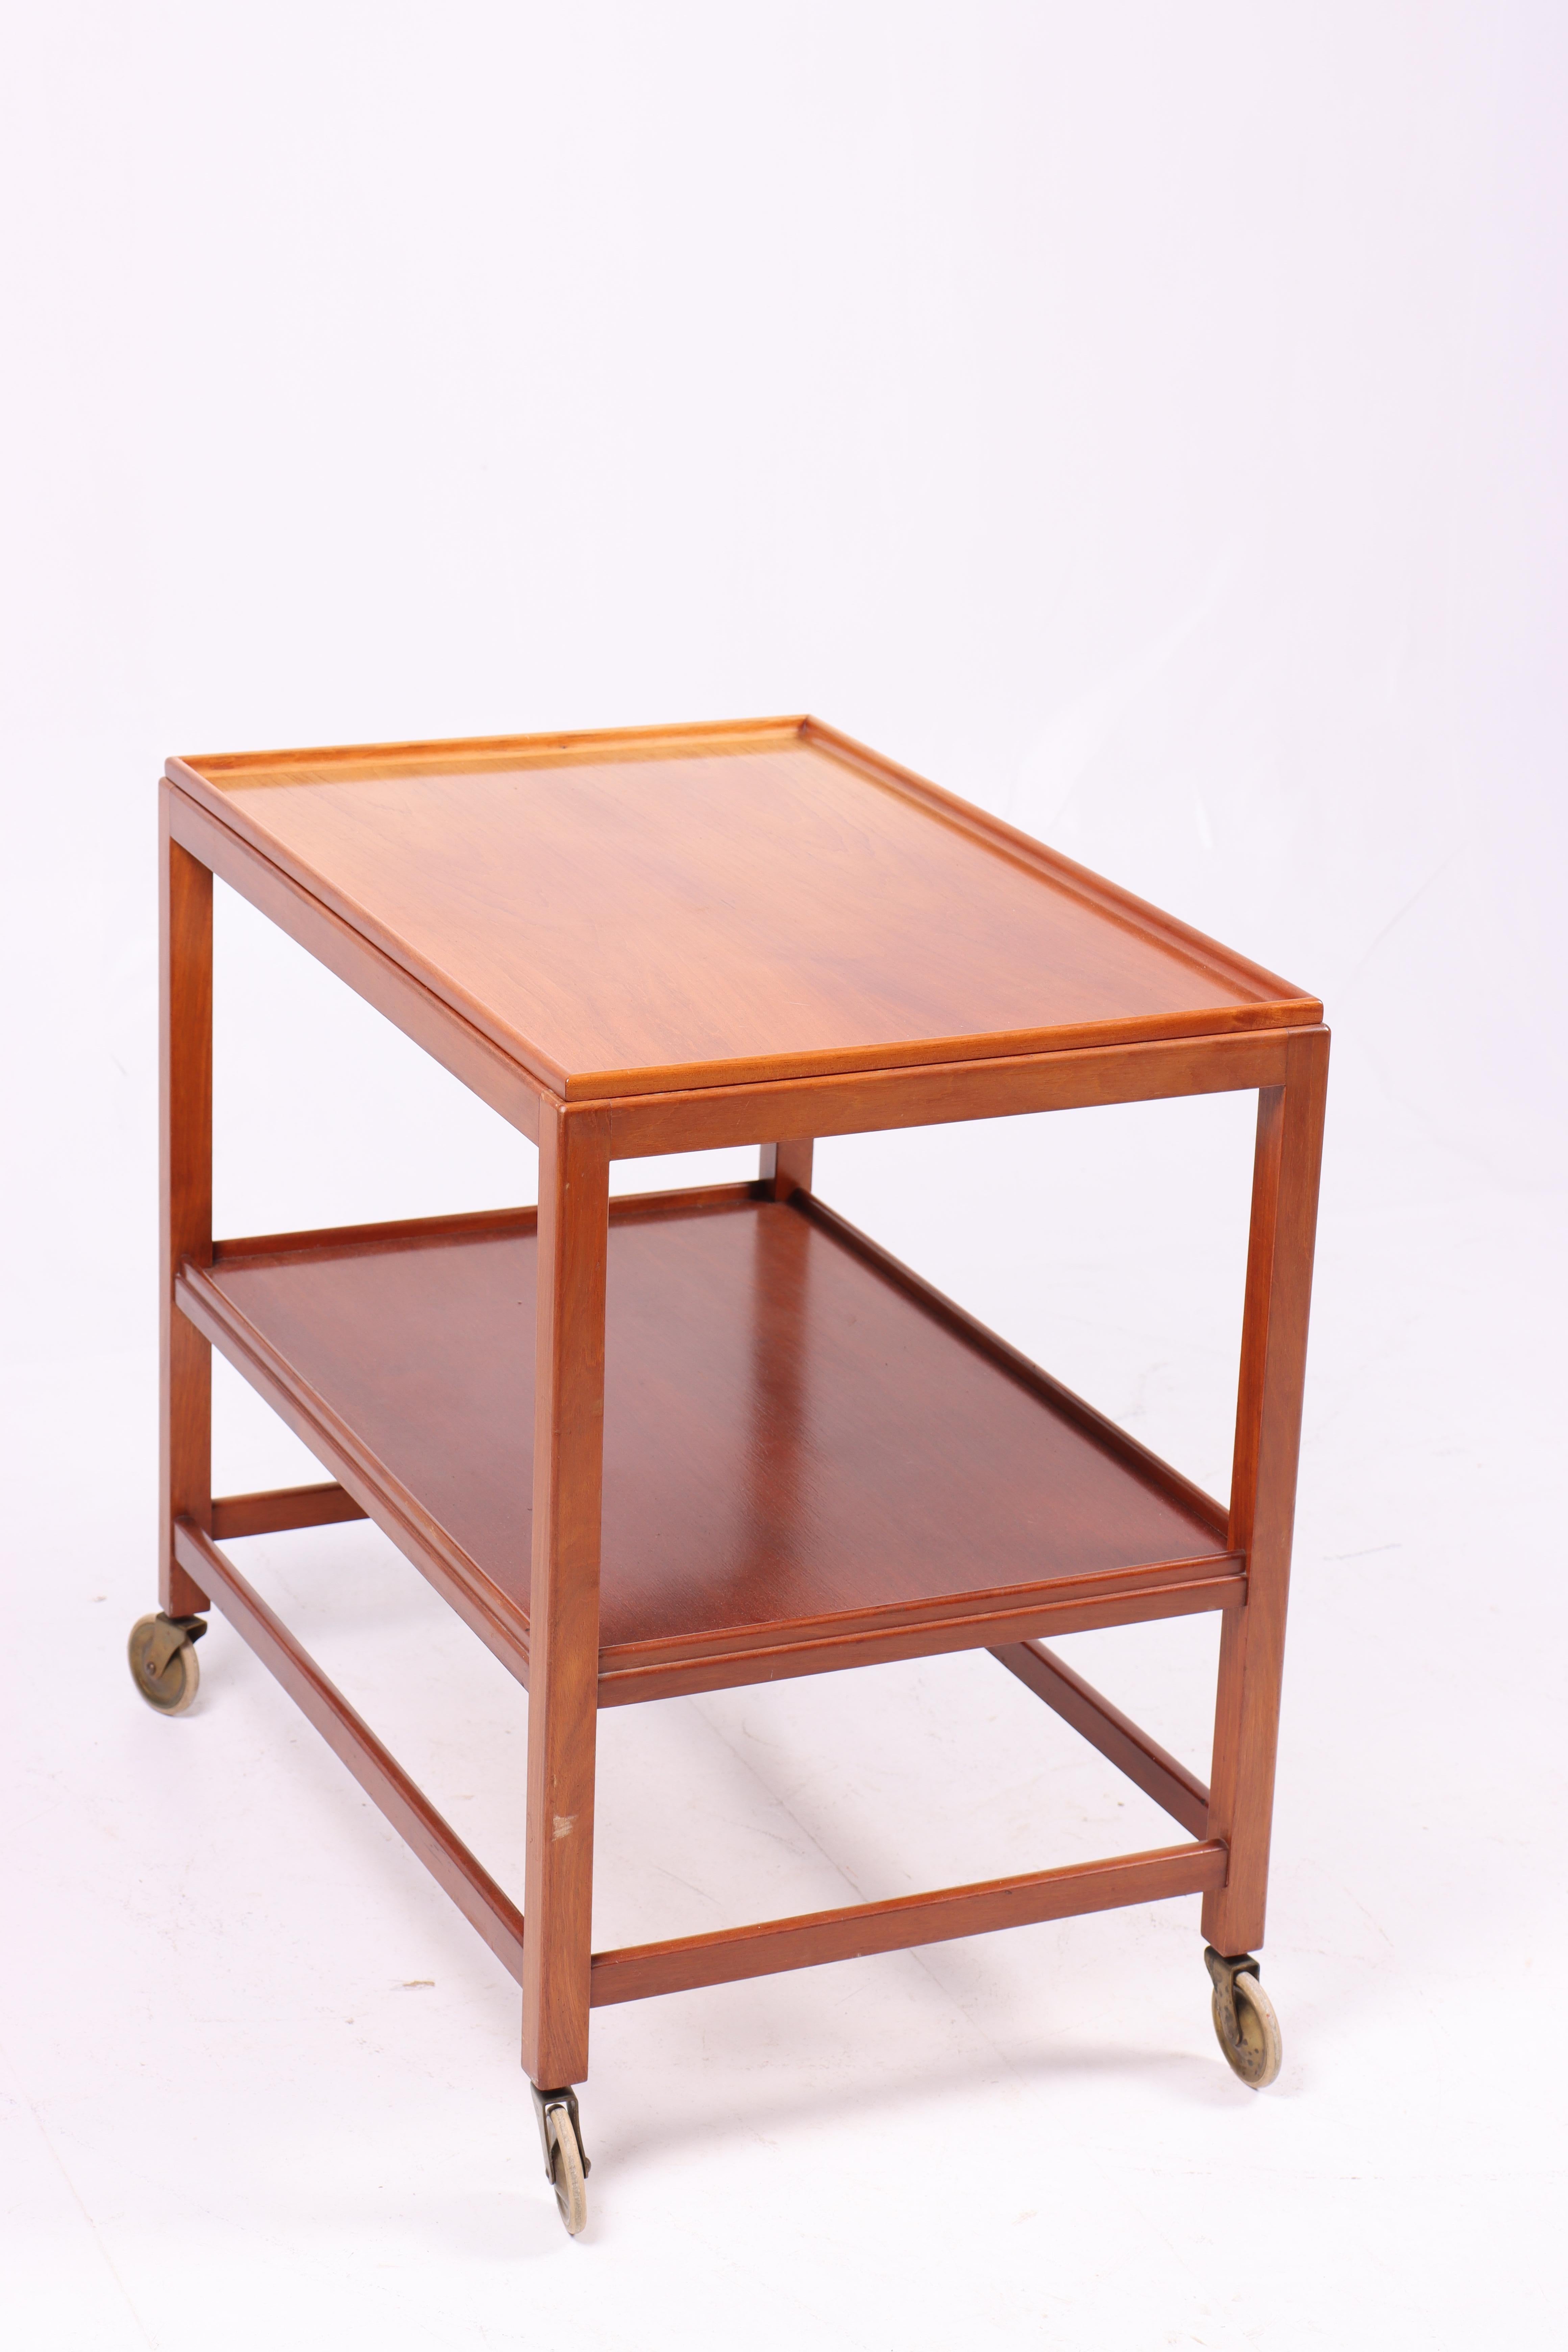 Midcentury Bar Cart in Mahogany Designed by Rud Rasmussen, 1950s In Good Condition For Sale In Lejre, DK